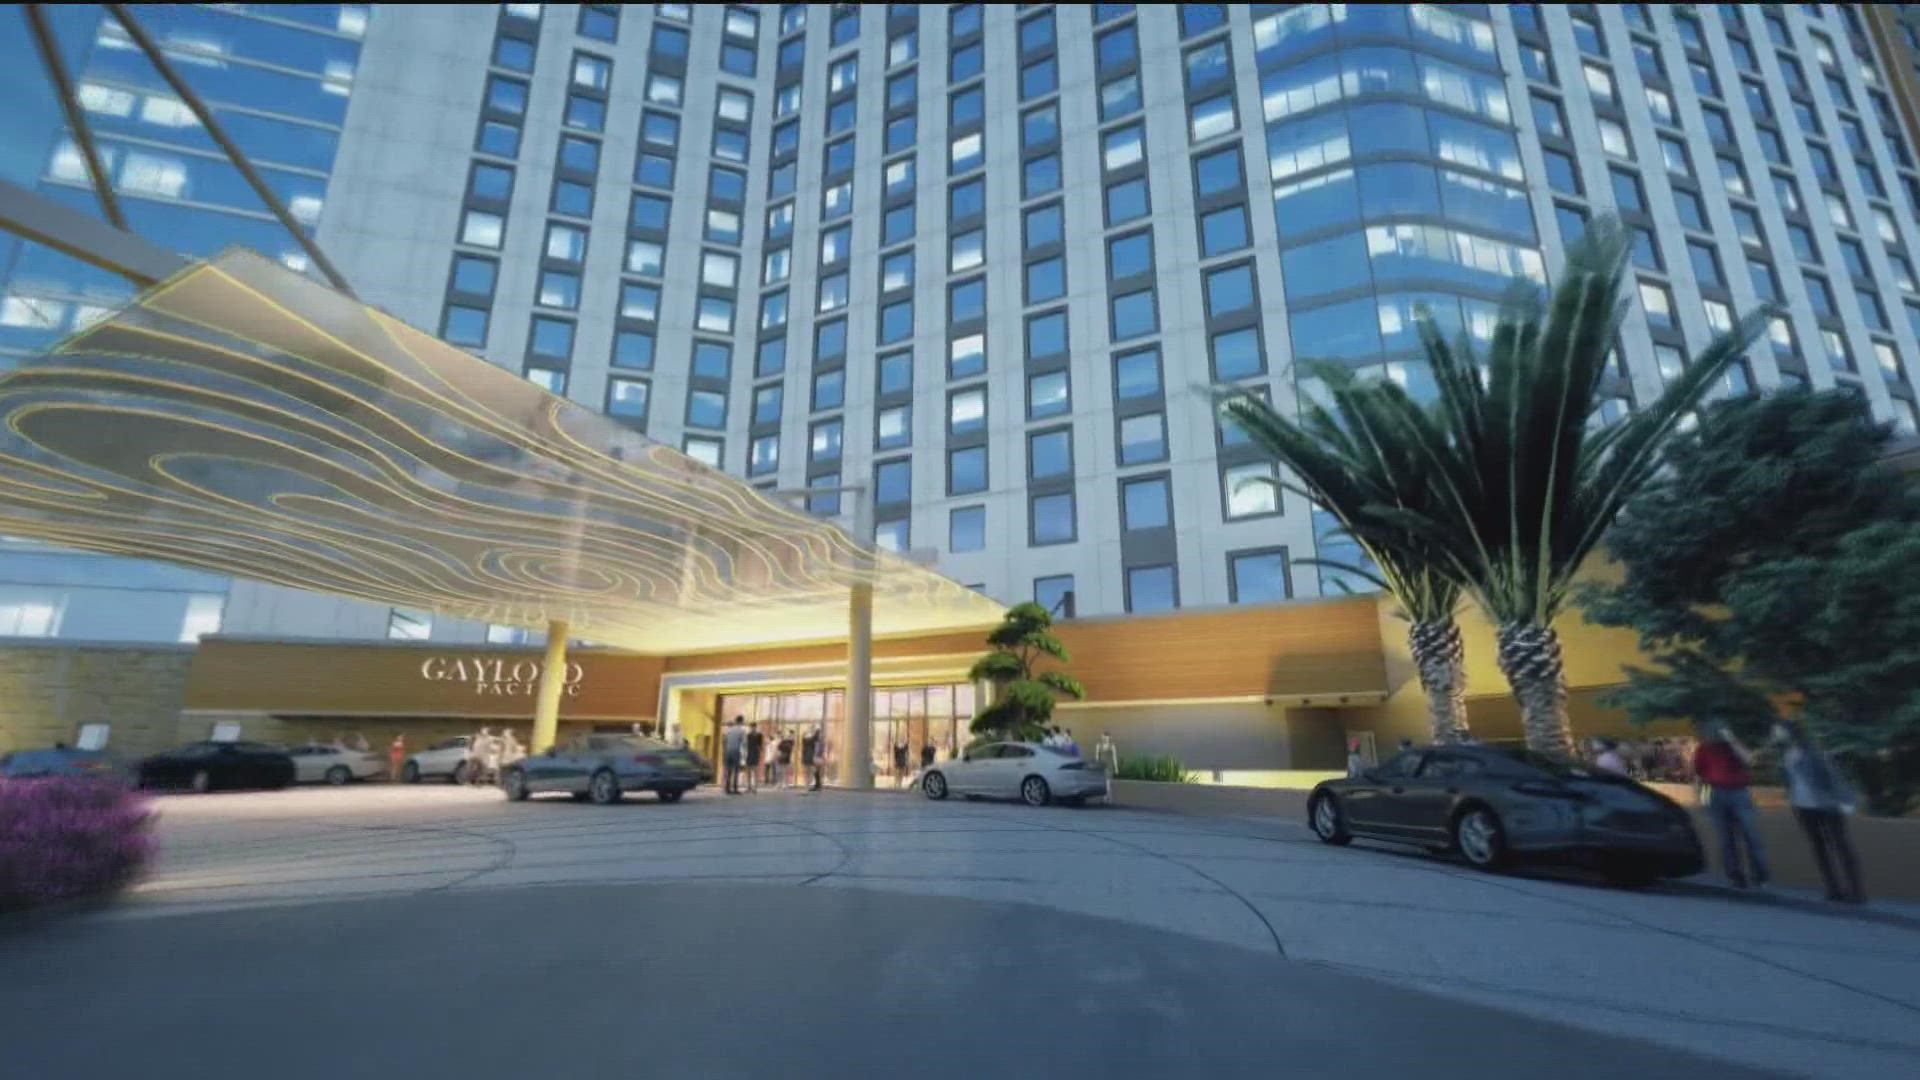 1600-room hotel and convention center scheduled to be completed by Memorial Day 2025.